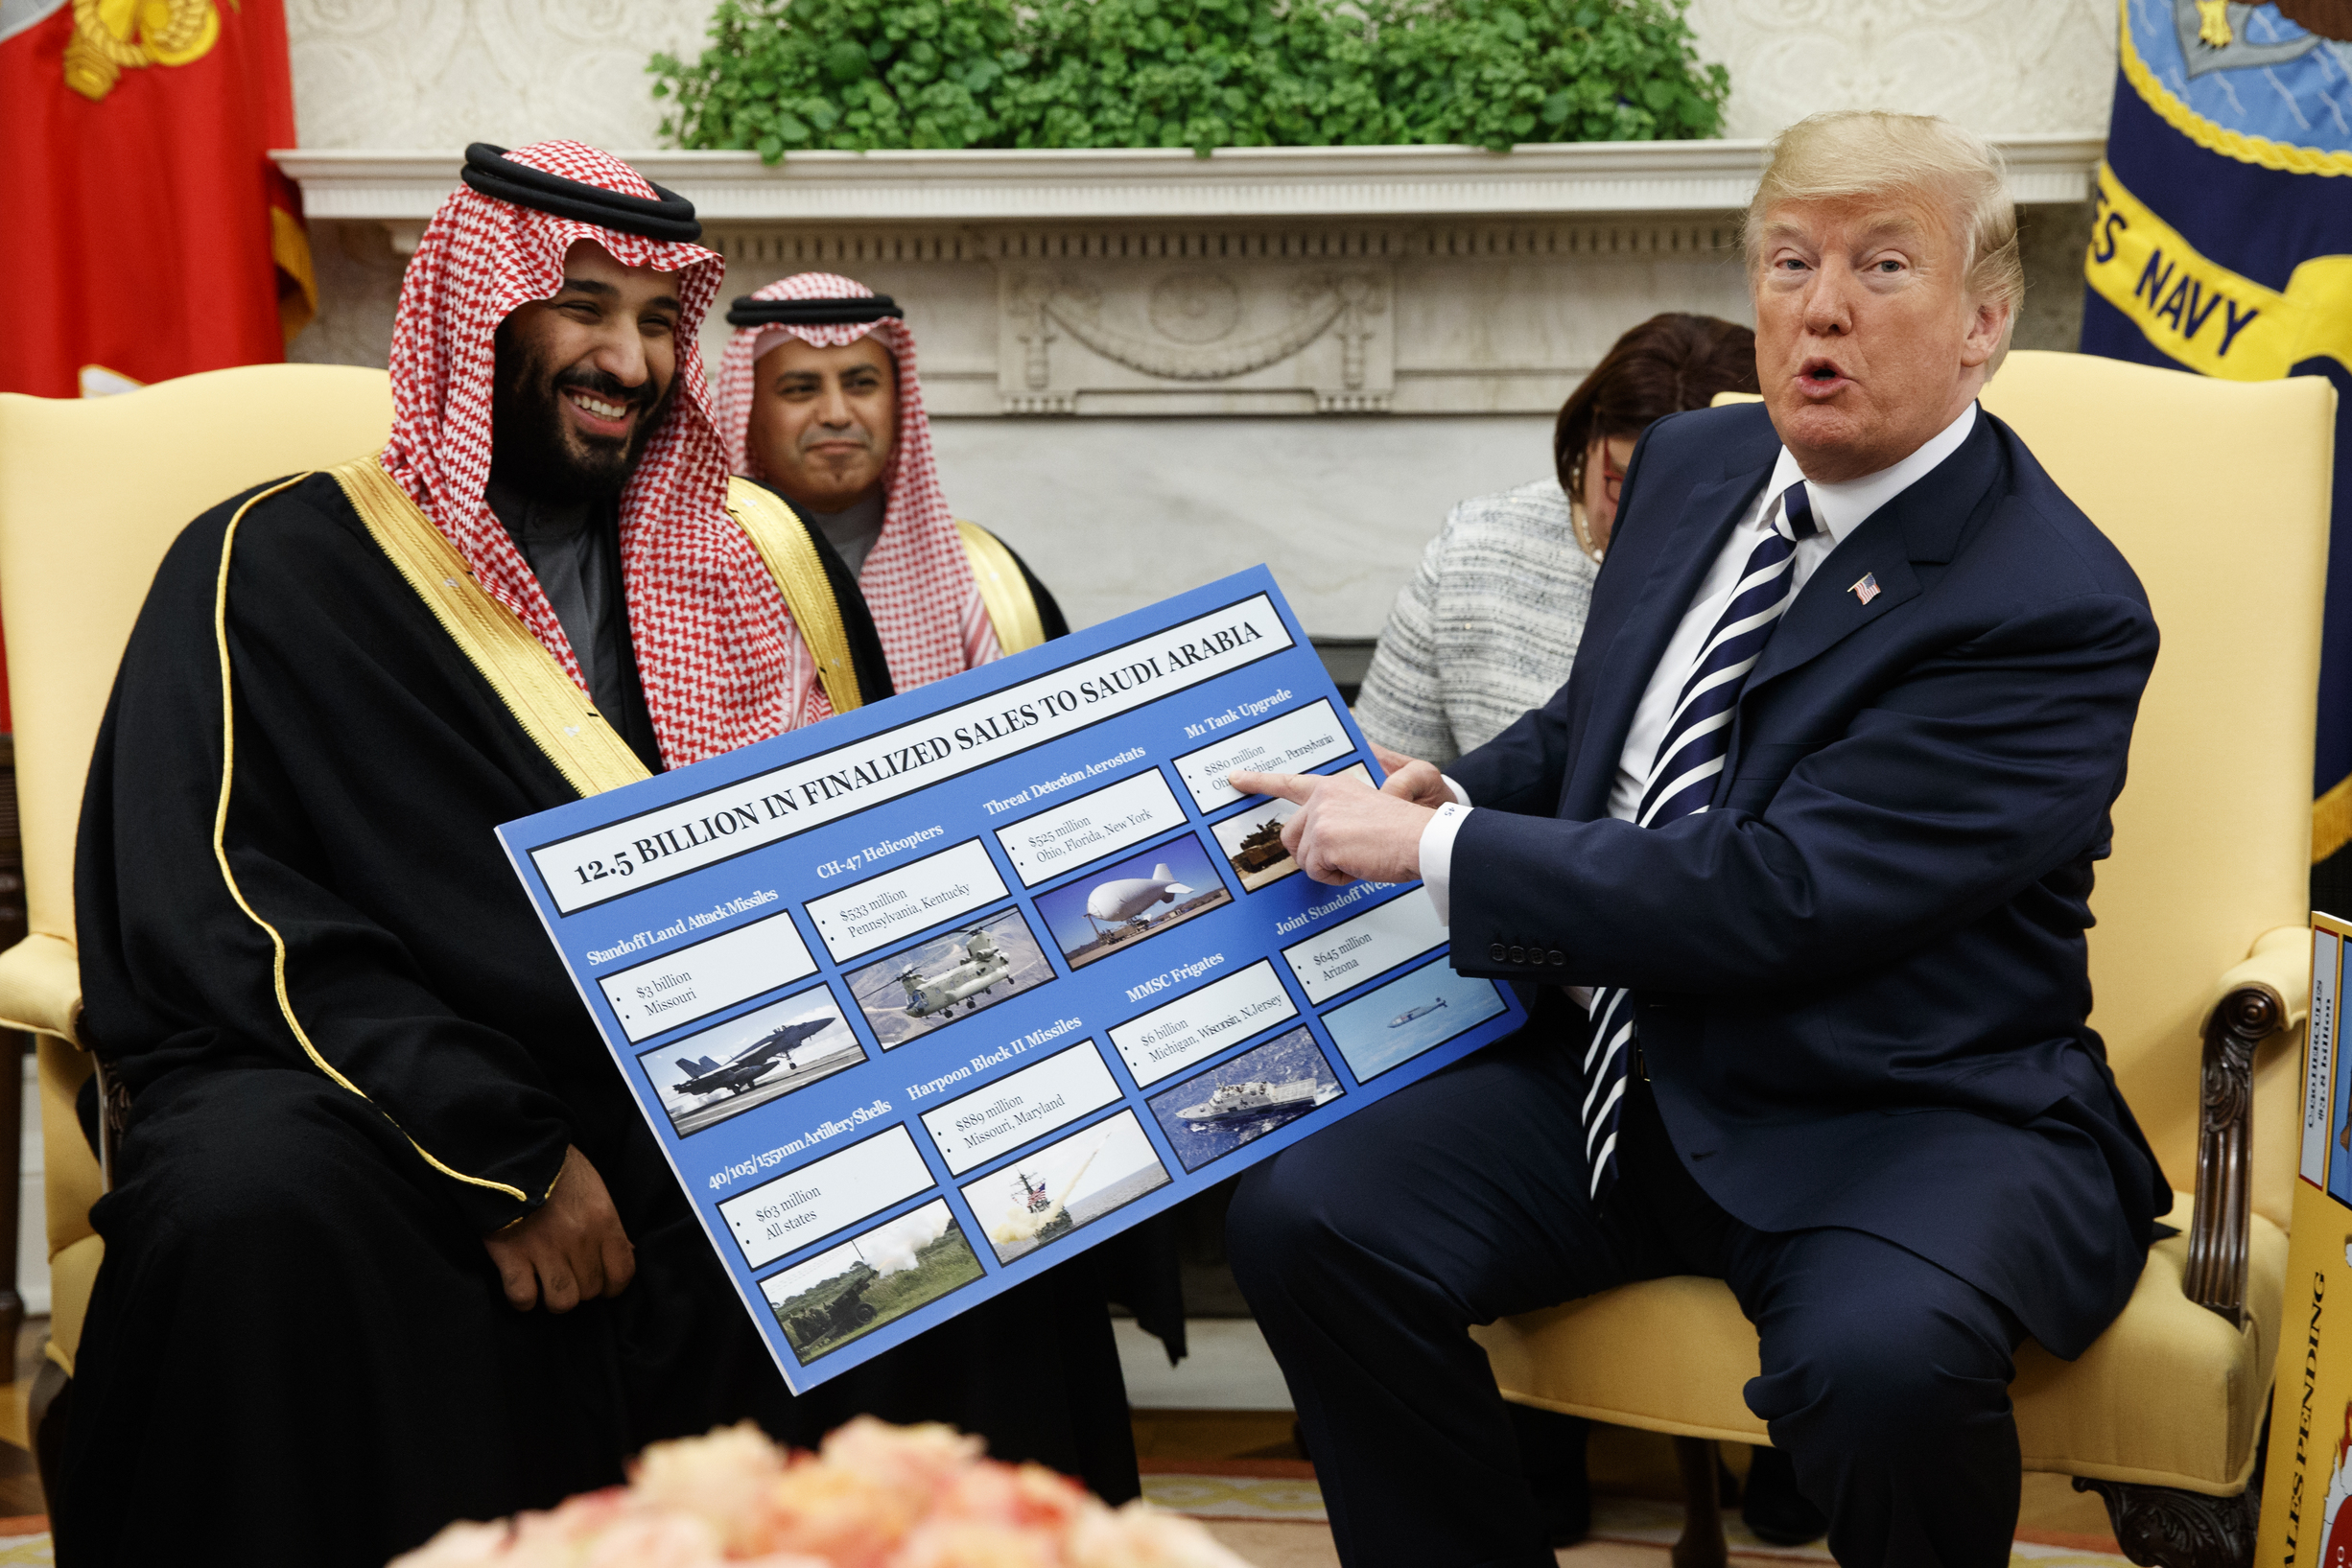 PHOTO: President Donald Trump shows a chart highlighting arms sales to Saudi Arabia during a meeting with Saudi Crown Prince Mohammed bin Salman in the Oval Office of the White House in Washington on March 20, 2018.